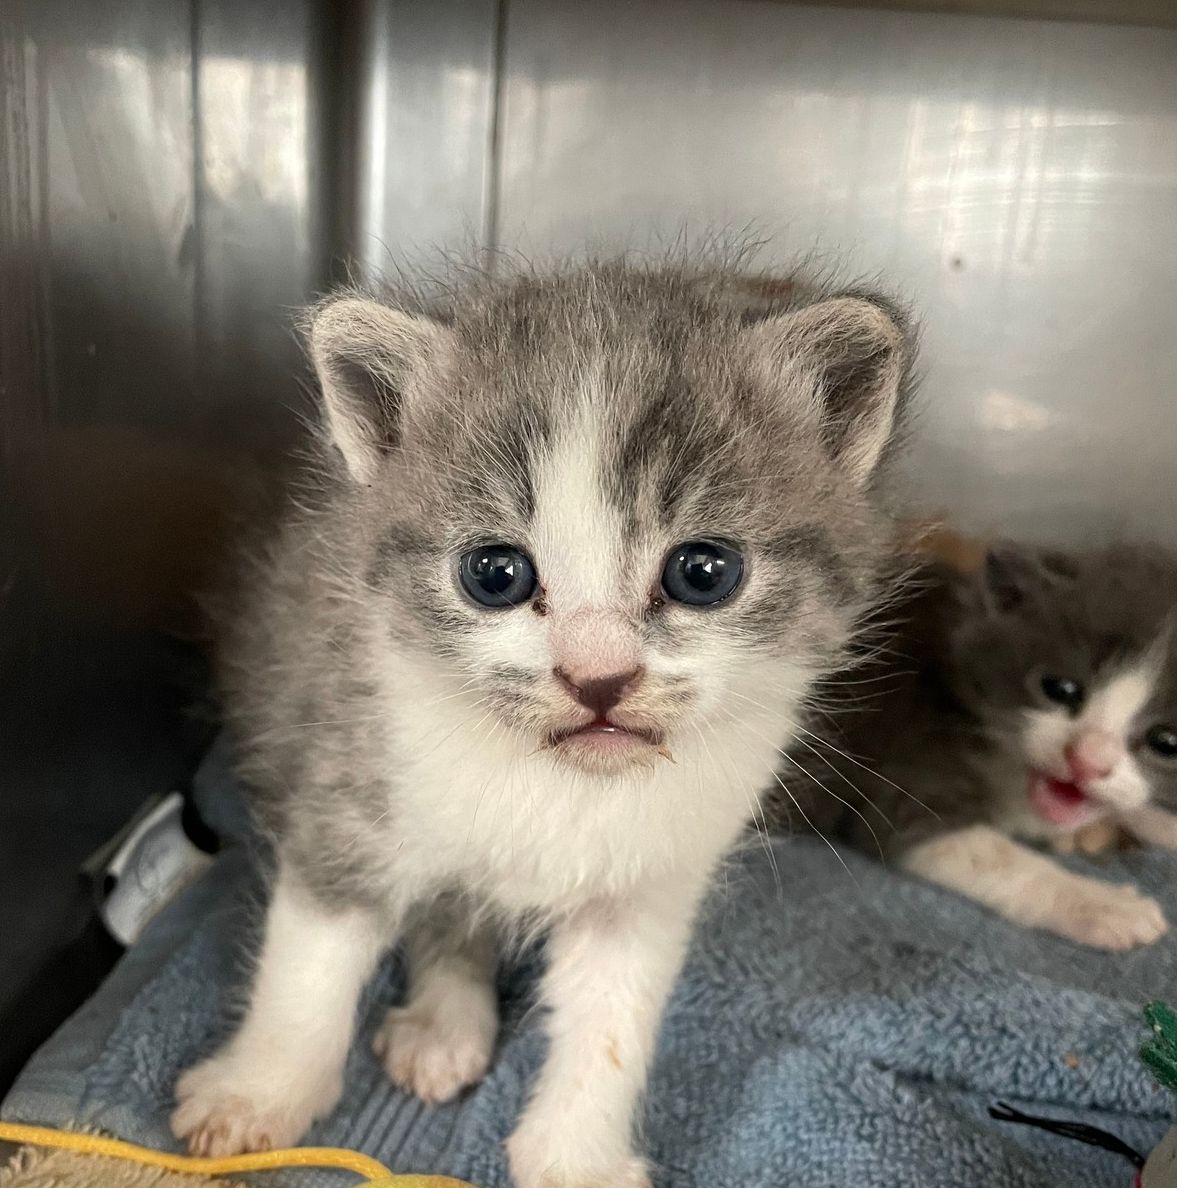 The kittens are coming! The kittens are HERE!! 🙀 Litters, singletons, kittens with mamas are coming in daily. How can you help? ibit.ly/bgGwQ 😻DONATE😻 Needed items & funds. 😽ADOPT😽 Meet your Friend for Life! 😺FOSTER😺 We furnish the supplies, you supply the TLC.